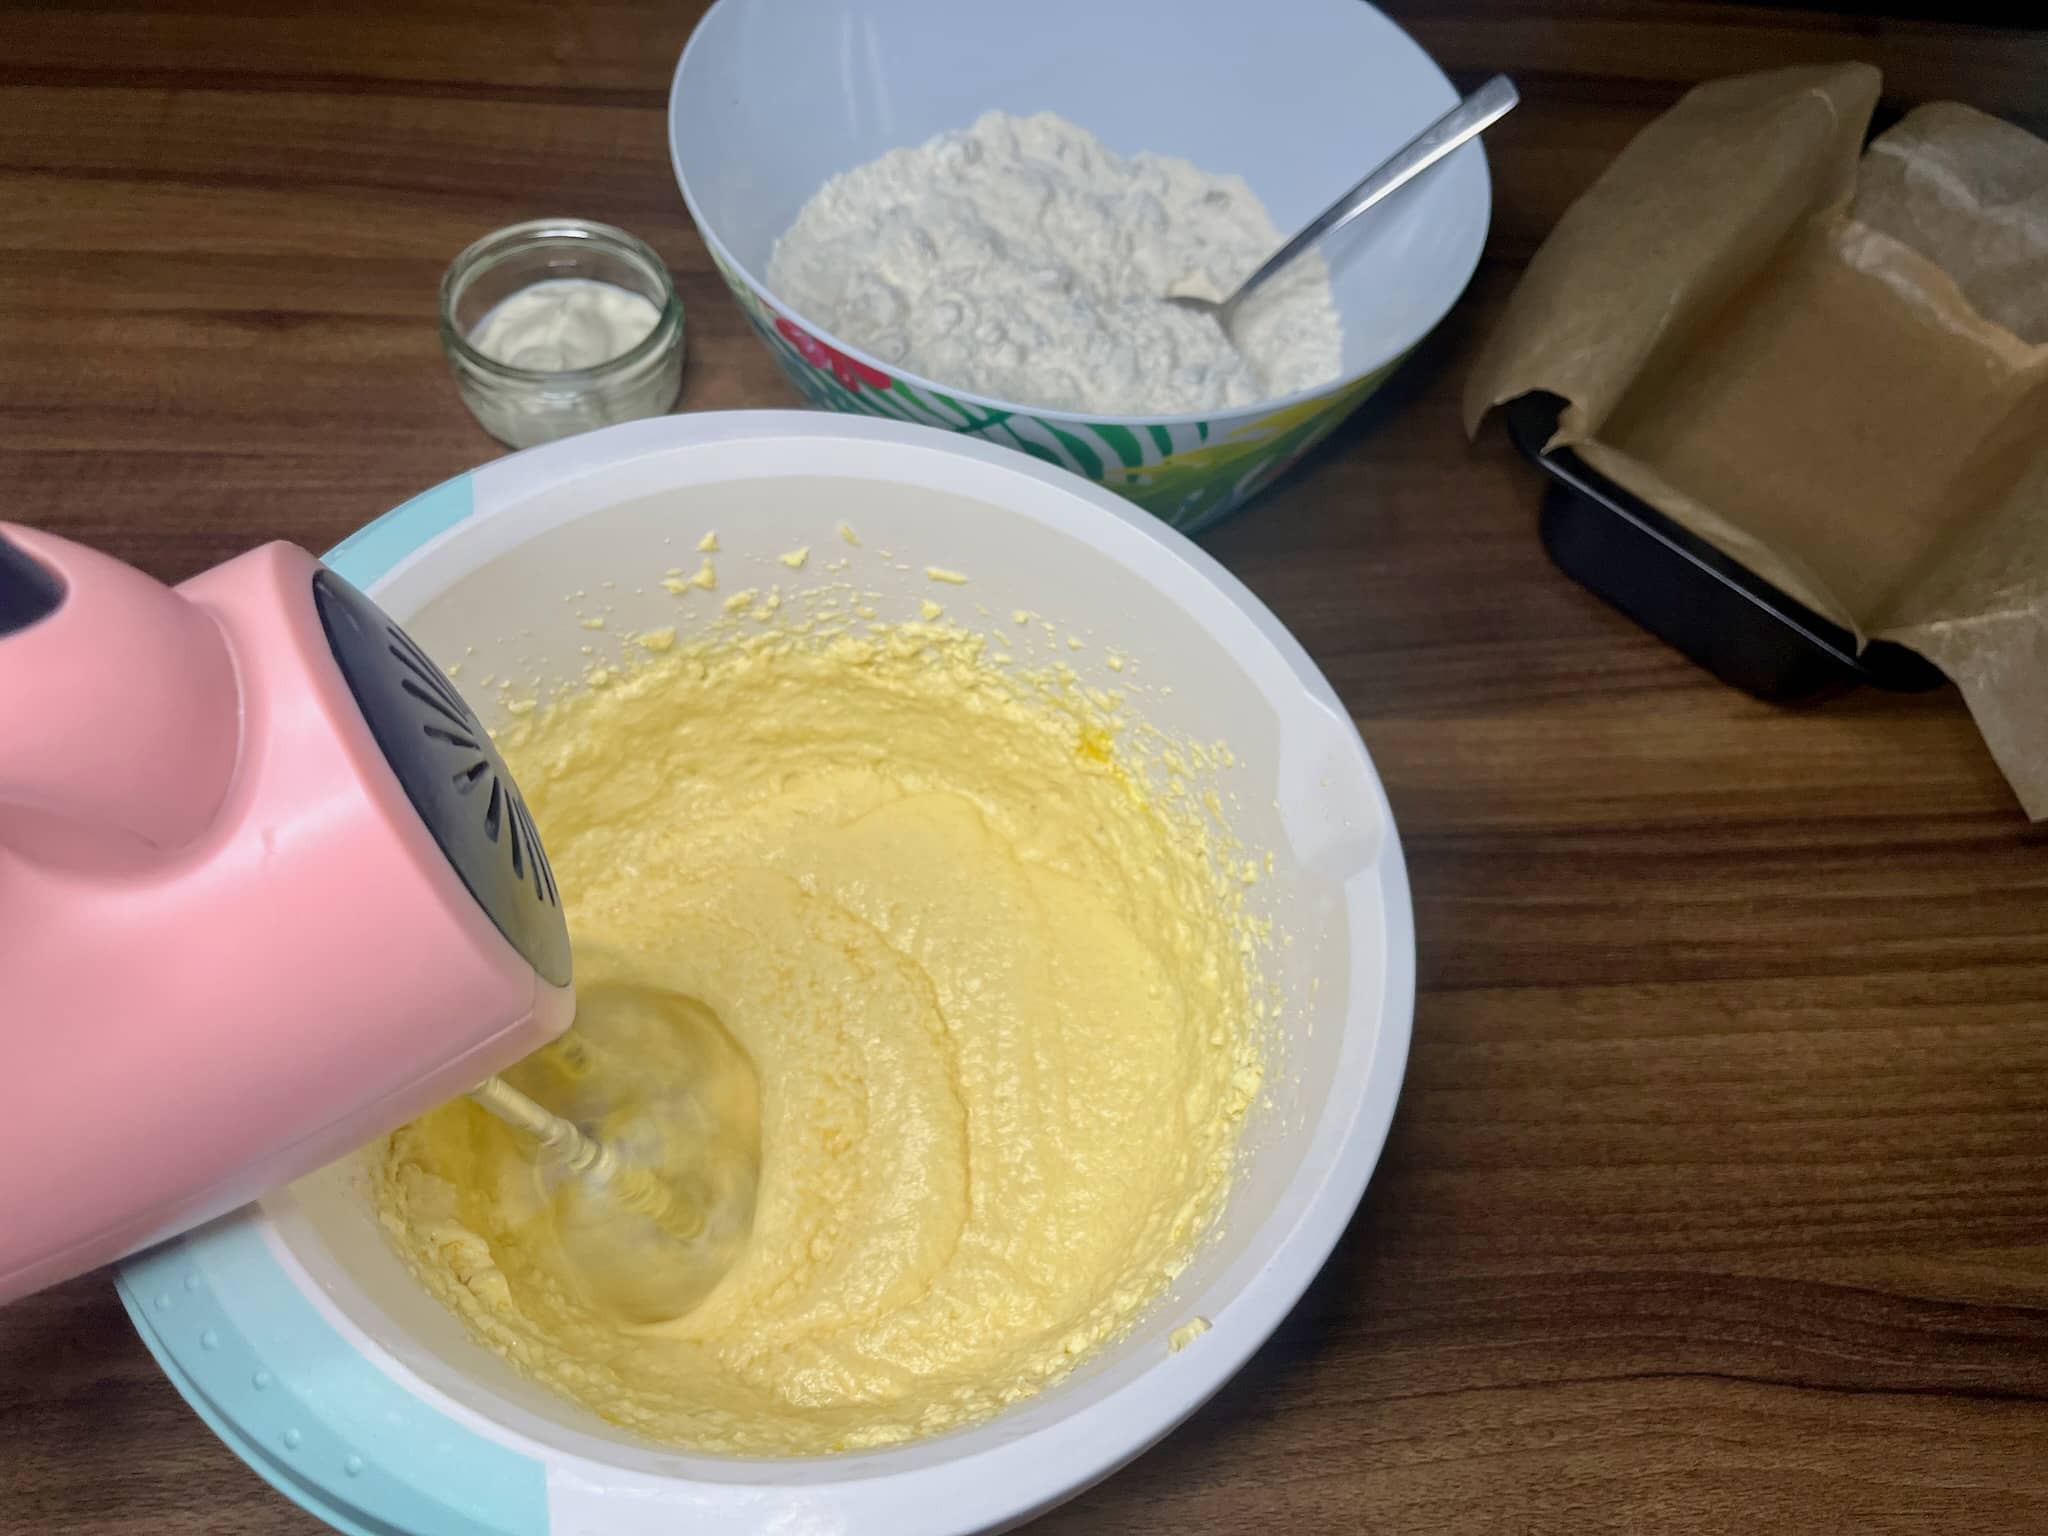 Butter mixed with icing sugar using a hand mixer in a bowl